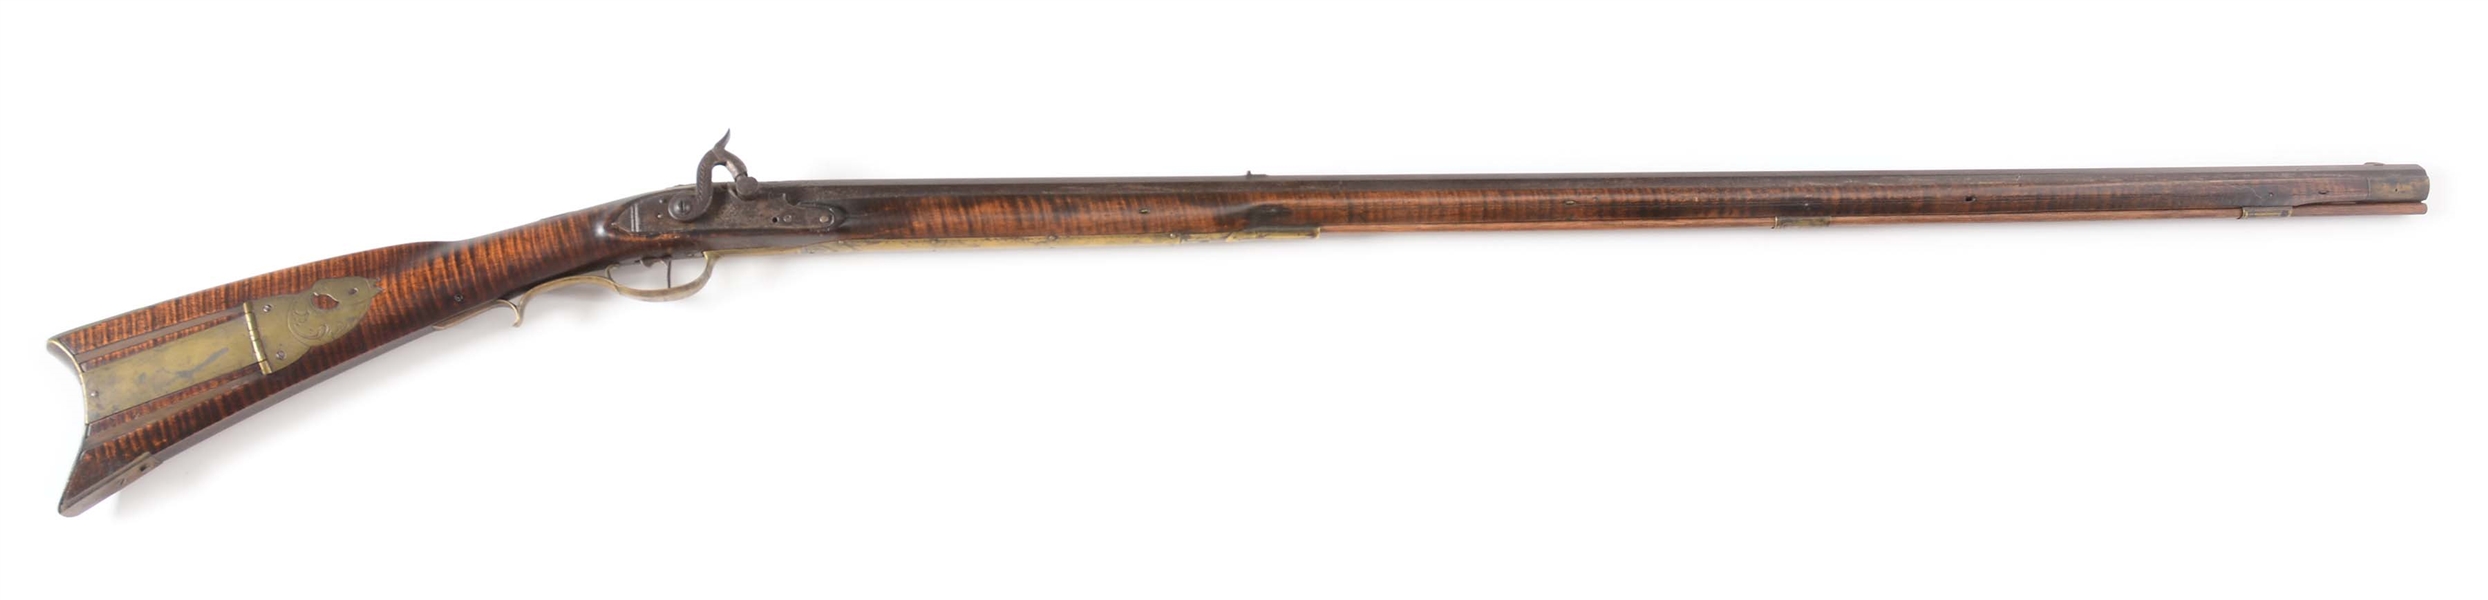 (A) HENRY ALBRIGHT PERCUSSION RIFLE.